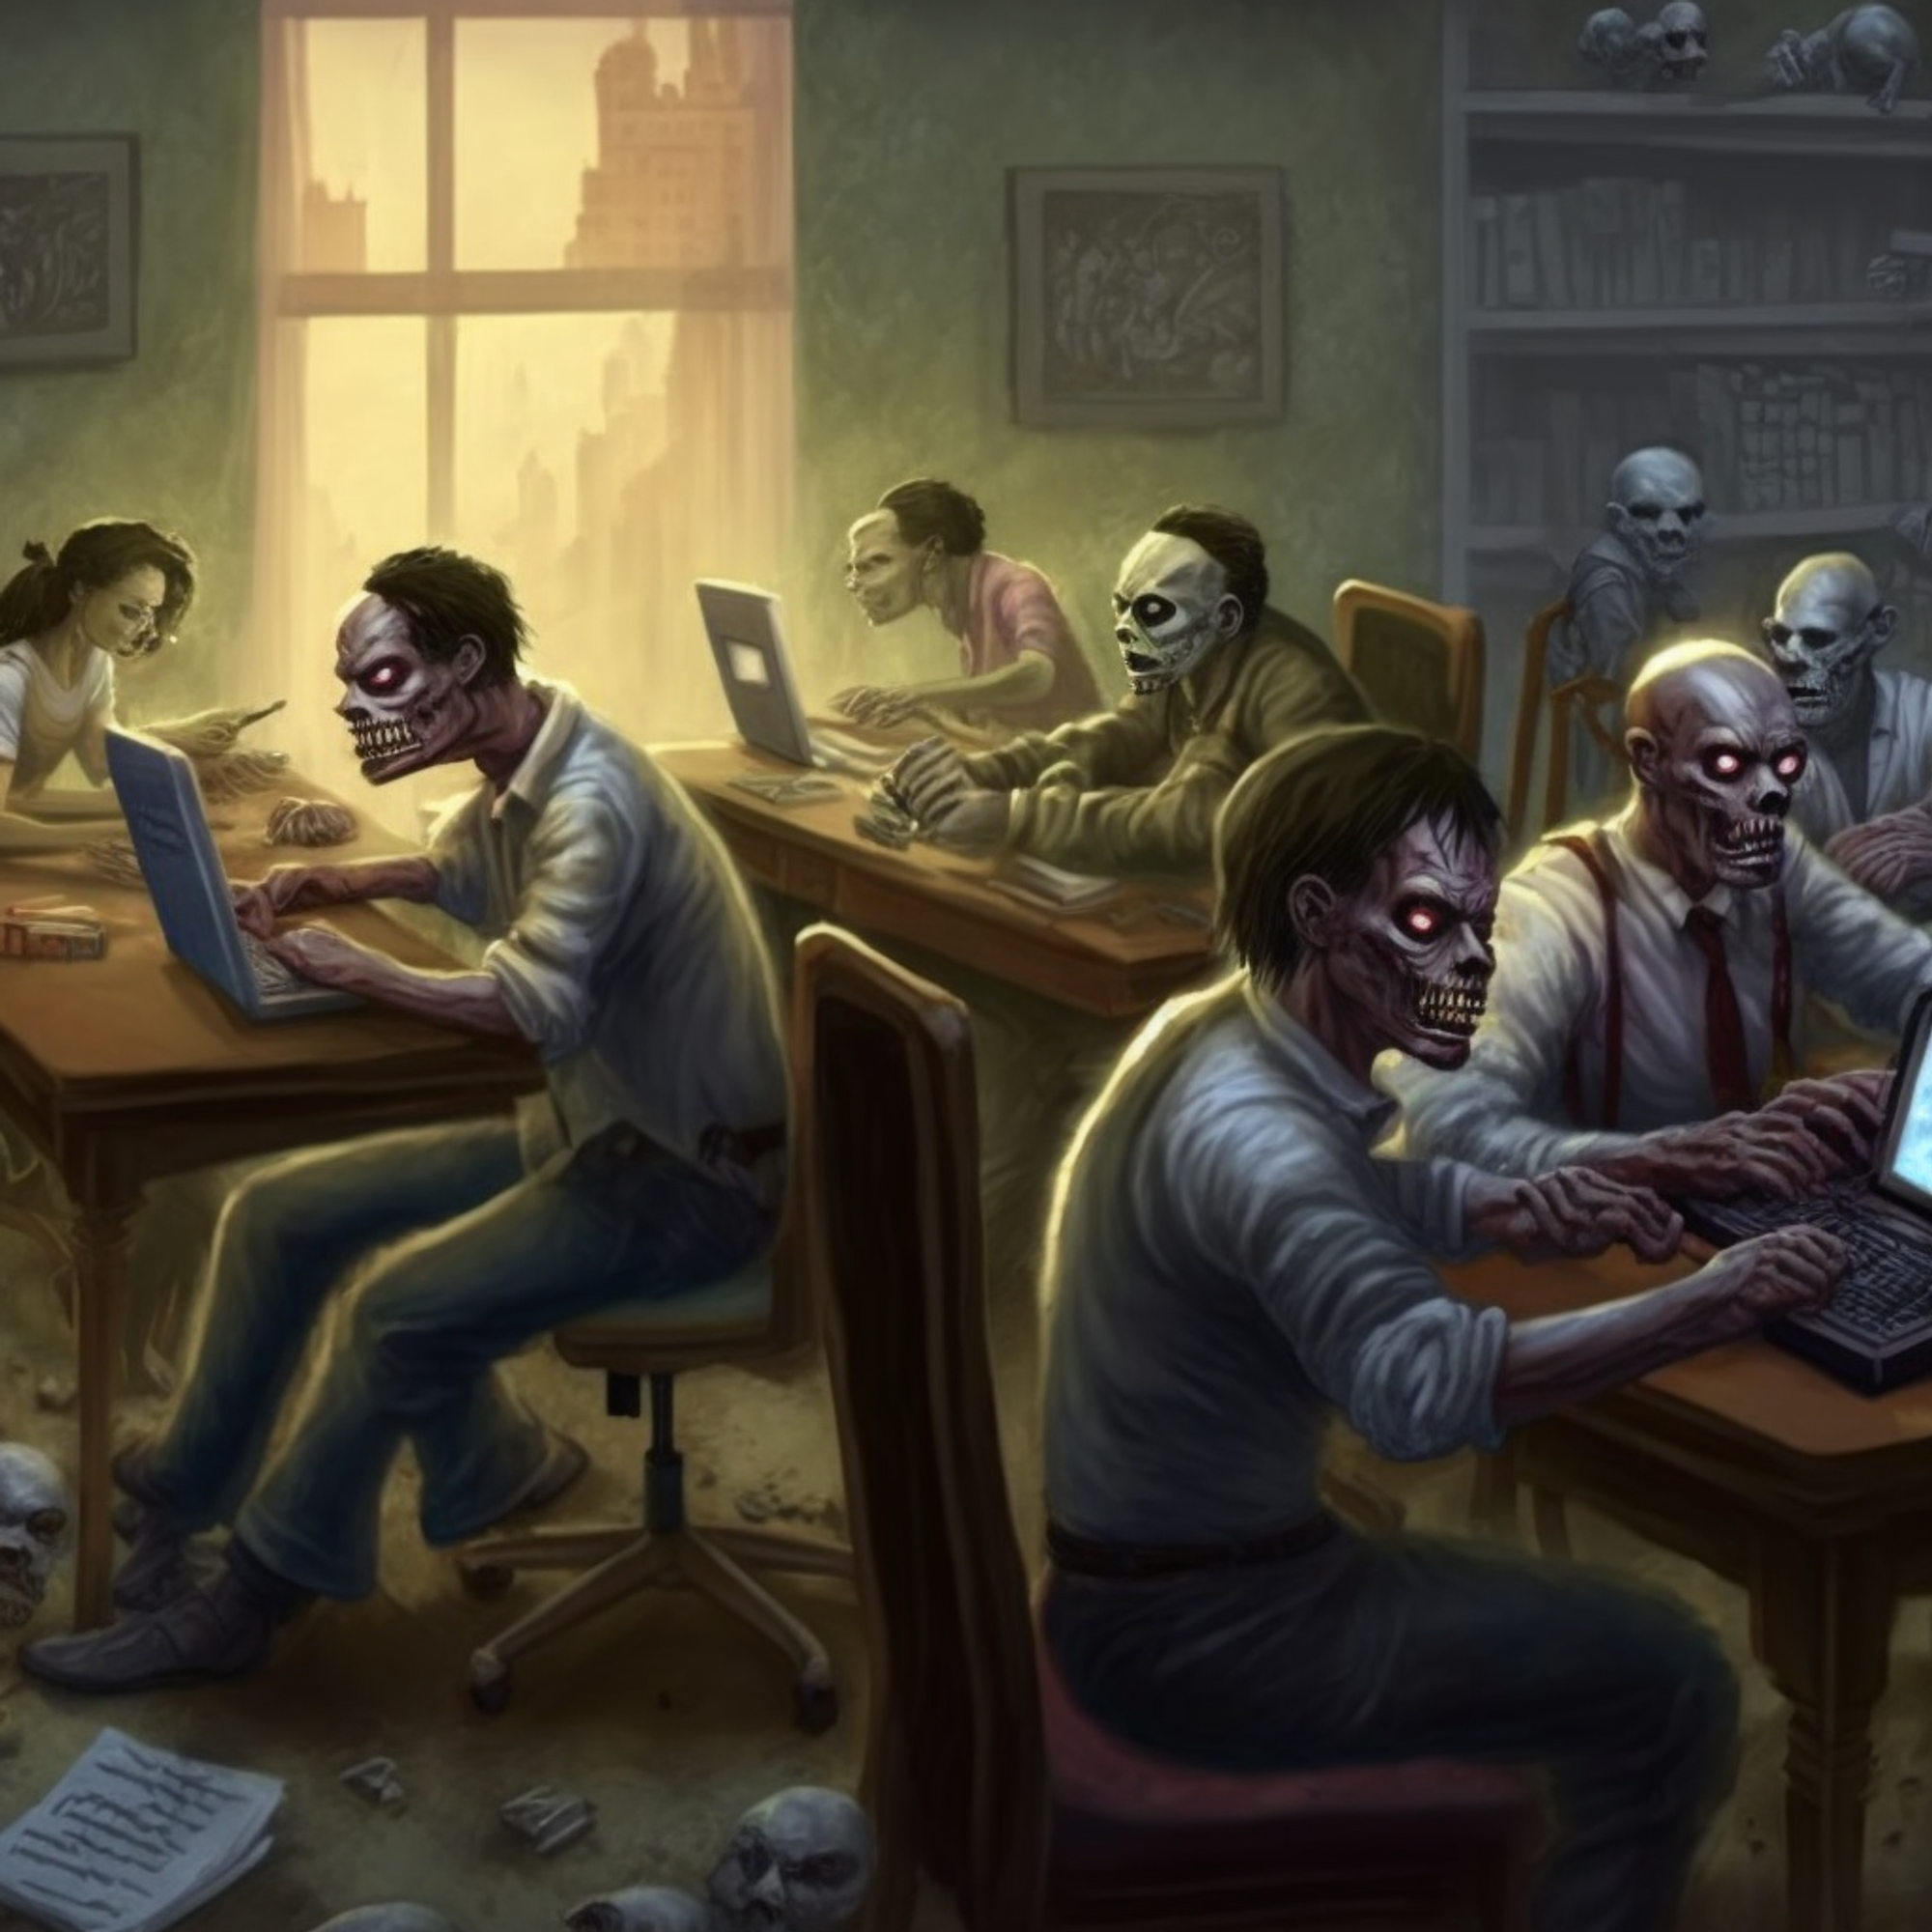 /imagine zombies working on laptops in a coworking space